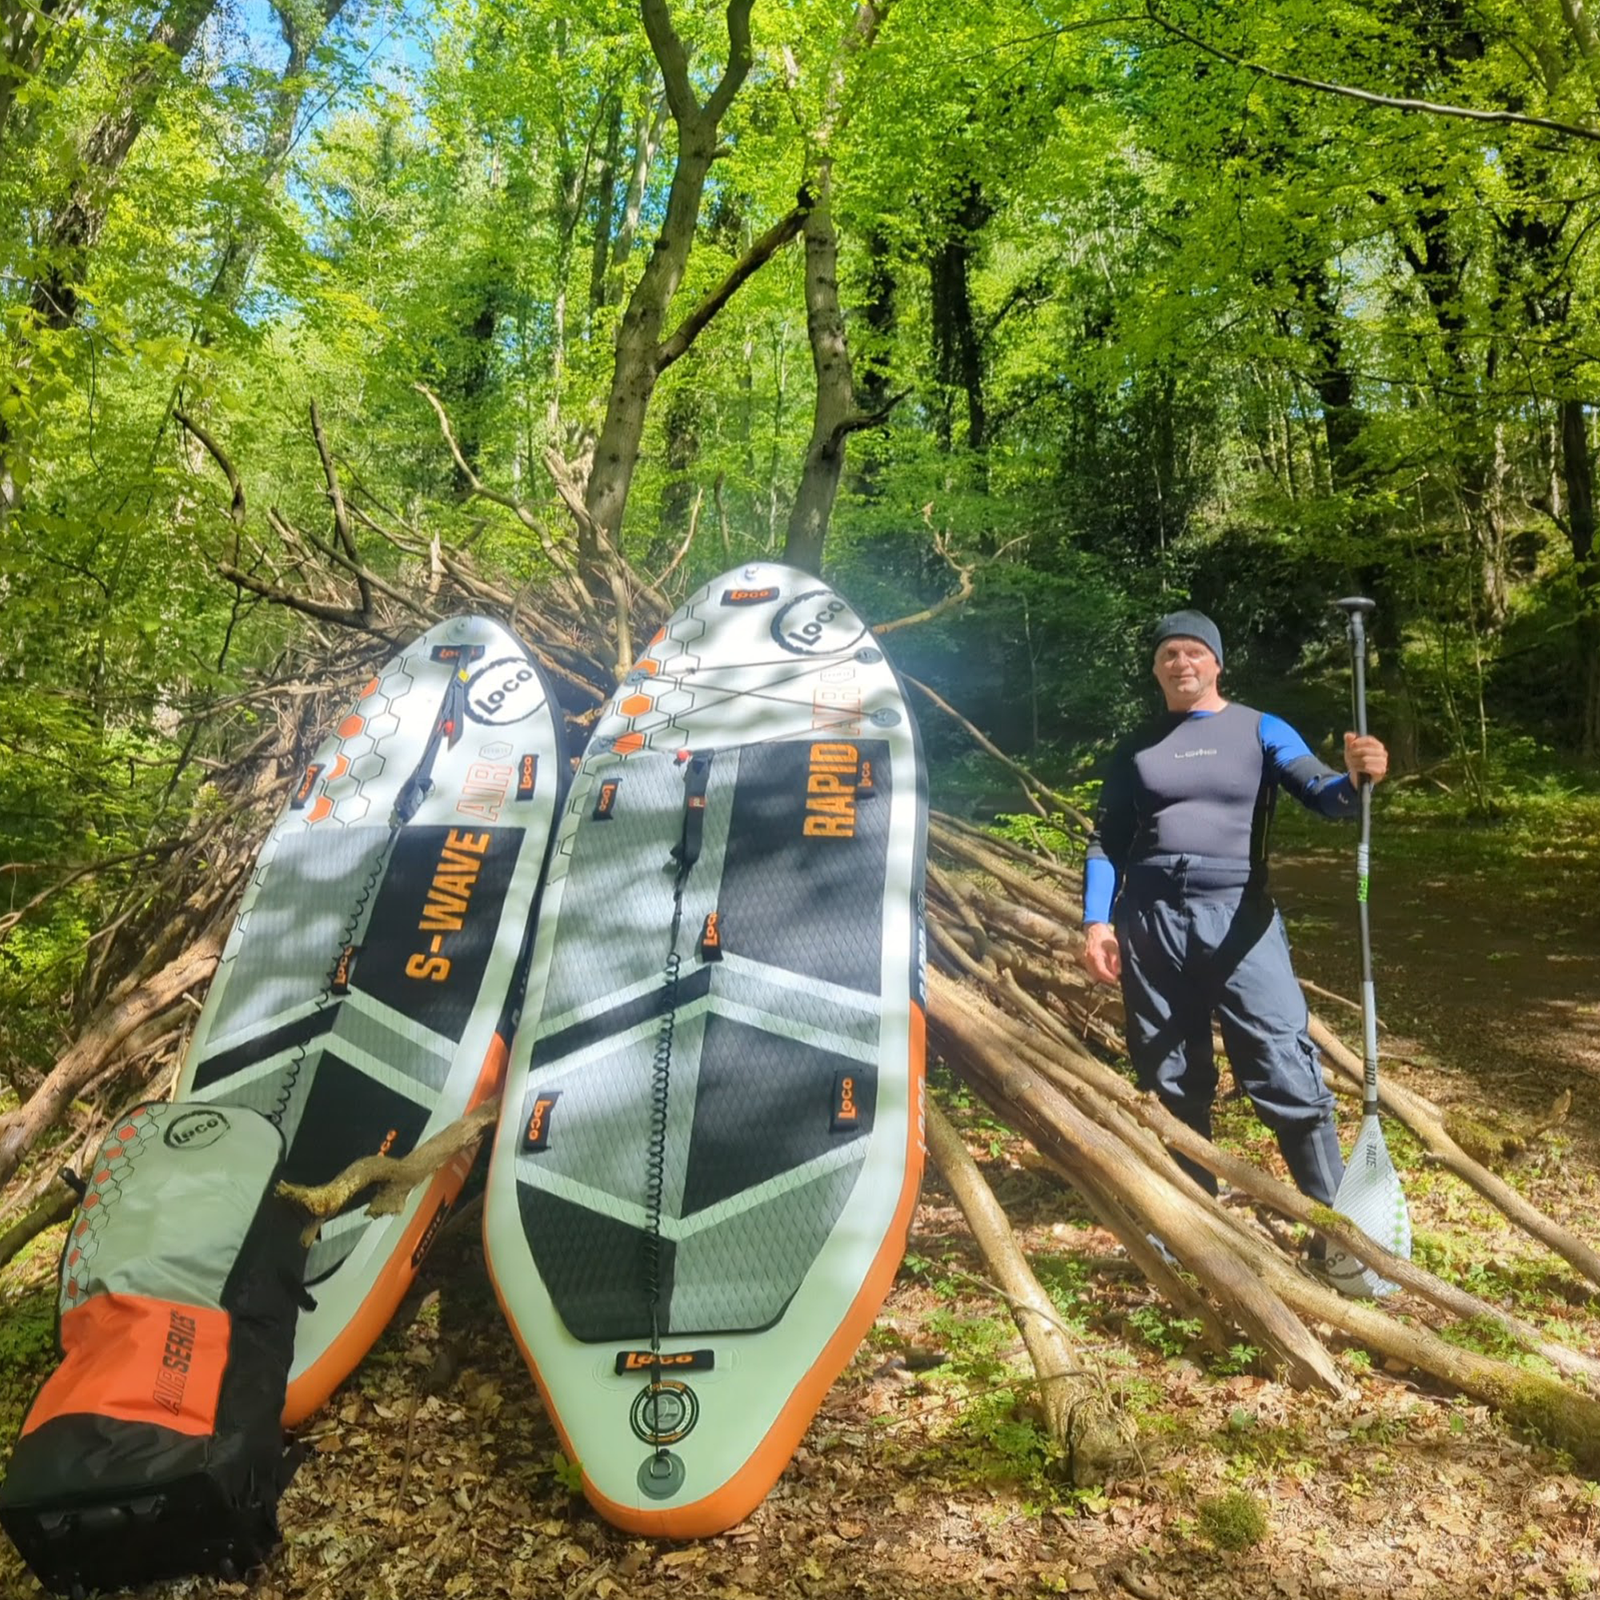 Len Cole with Loco's white water boards, Exploring the Loco S-Wave Air and Loco Rapid Air White Water Inflatable Paddleboards at Holme Pierrepont